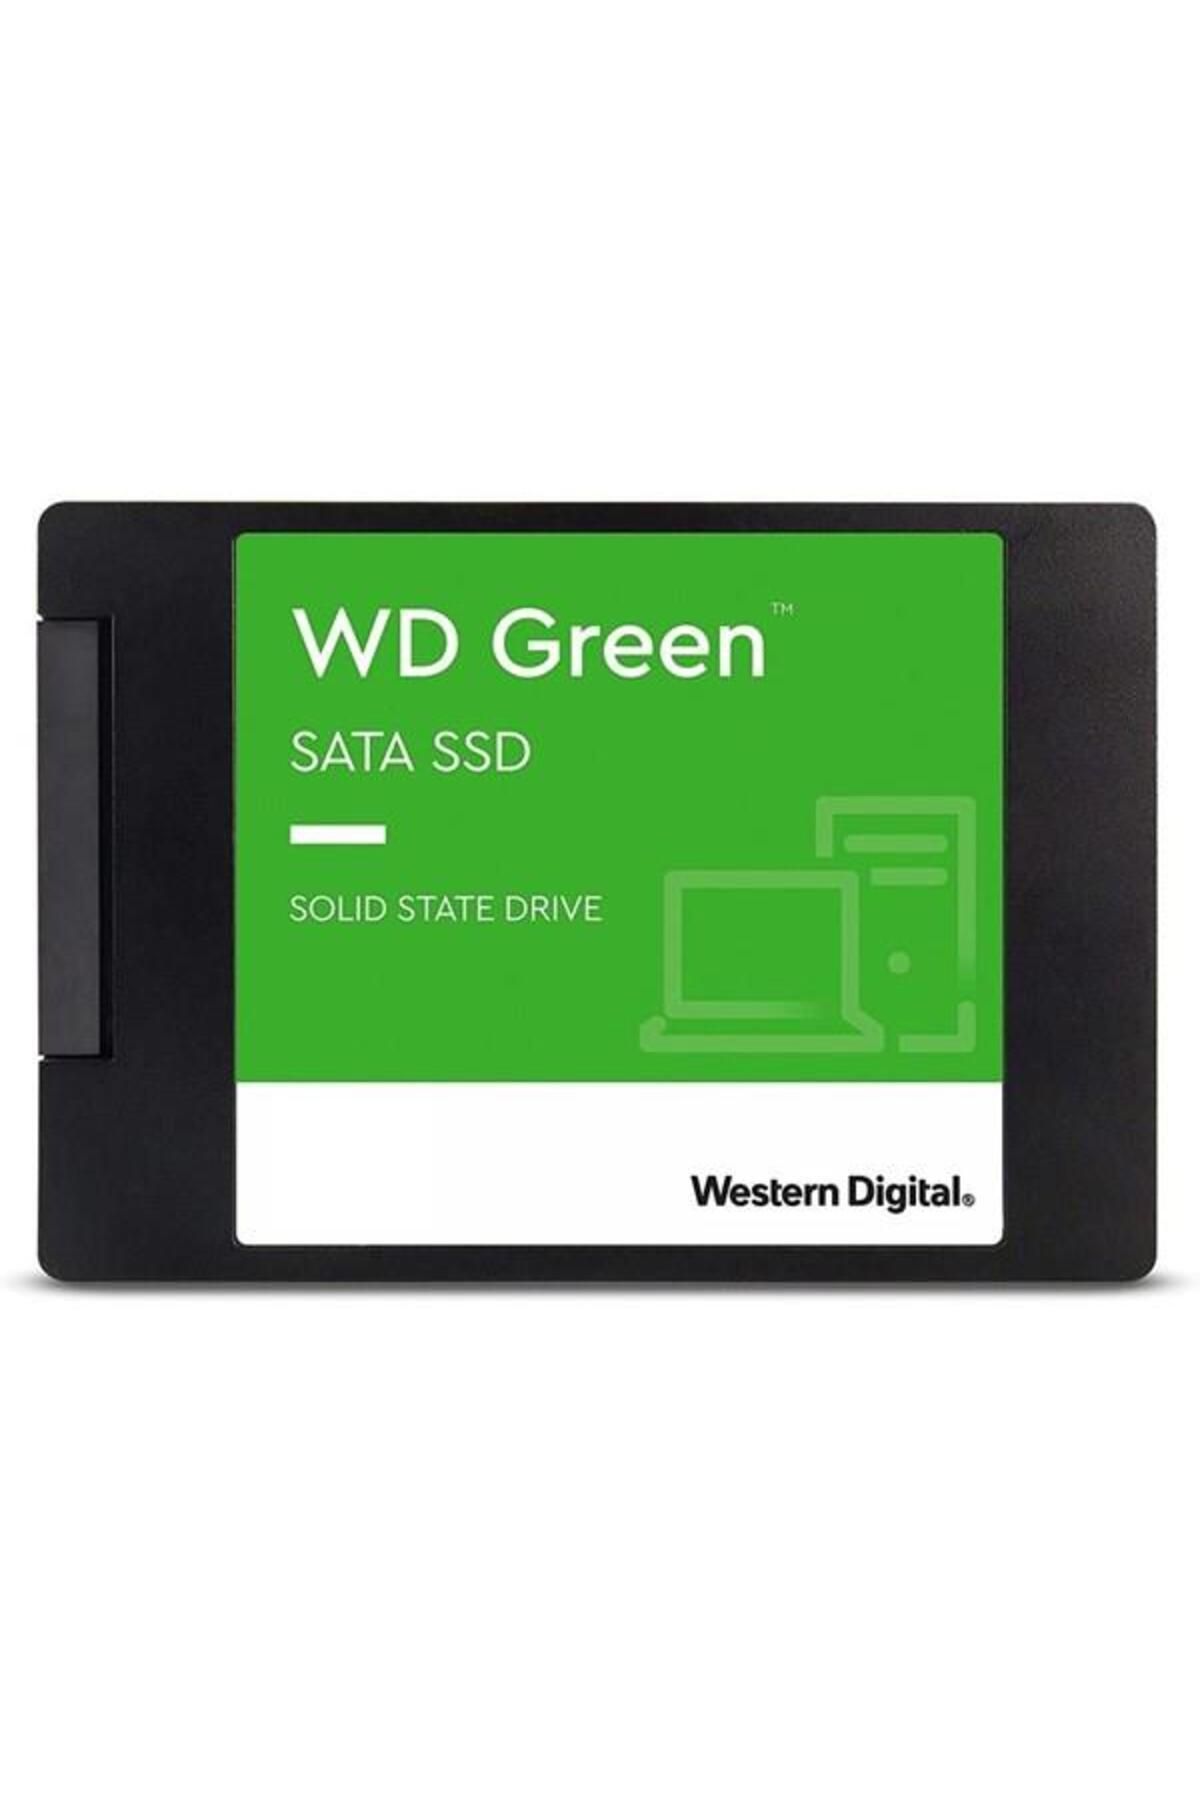 WD 2tb Green S200t2g0a 545-465mb/s Sata-ssd Disk